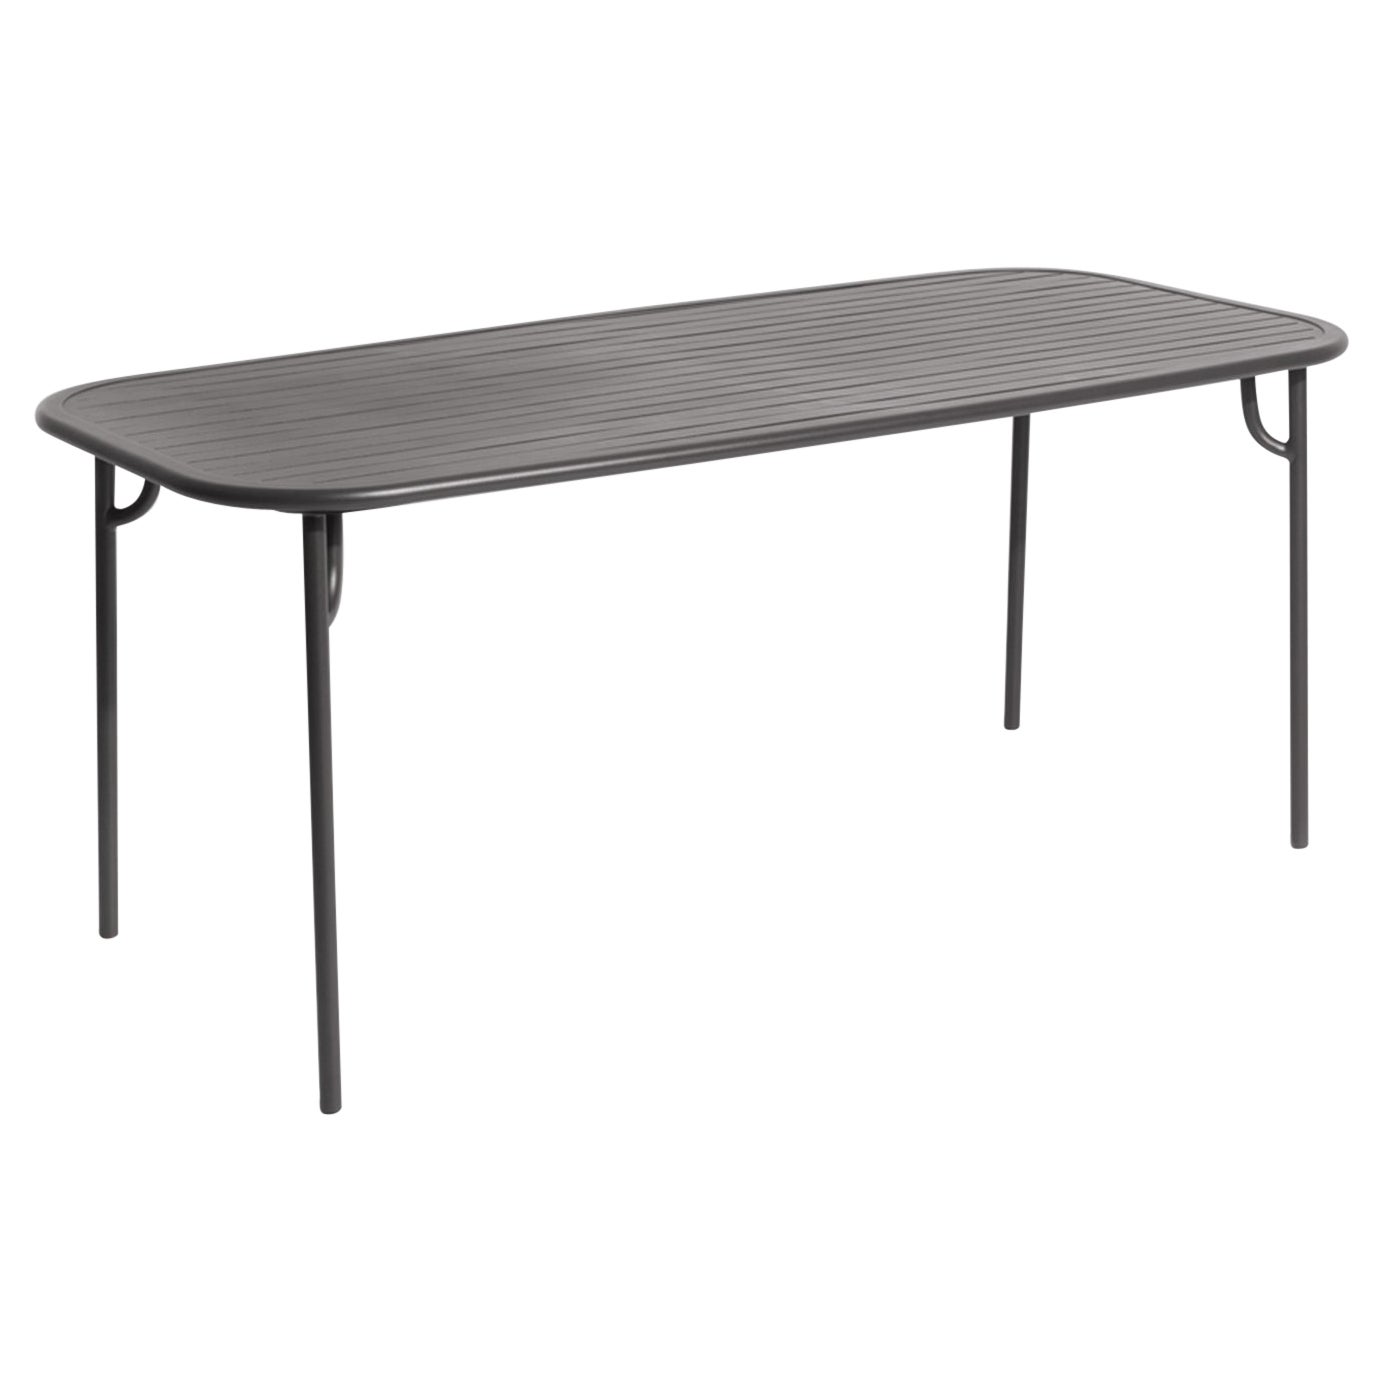 Petite Friture Week-End Medium Rectangular Dining Table in Anthracite with Slats For Sale